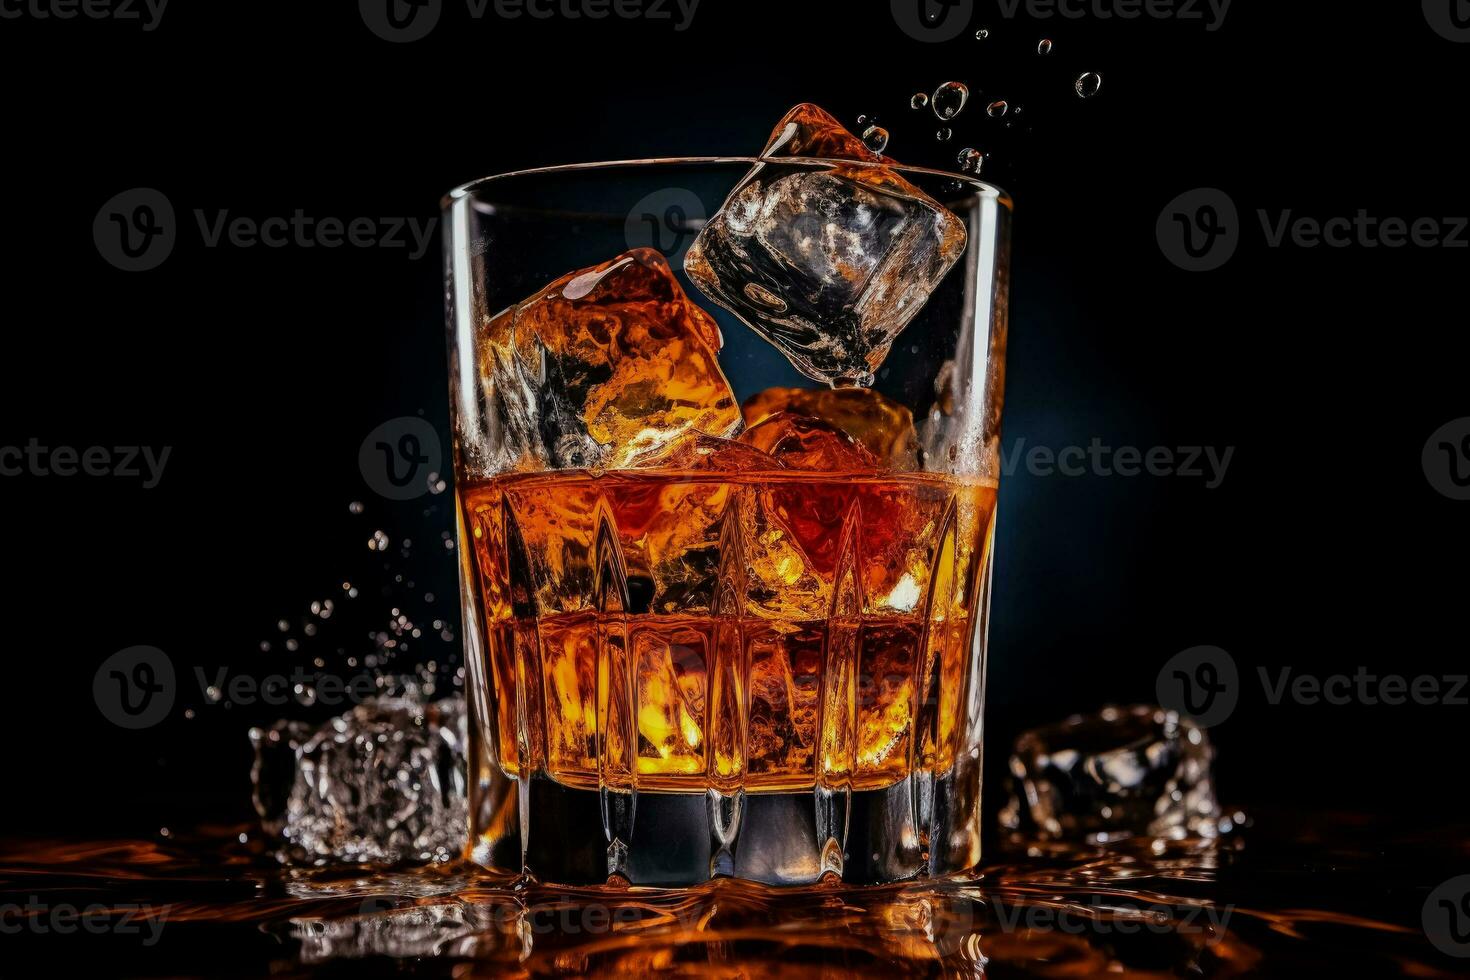 https://static.vecteezy.com/system/resources/previews/030/767/187/non_2x/isolated-on-black-a-glass-splashes-whiskey-with-ice-cubes-photo.jpg